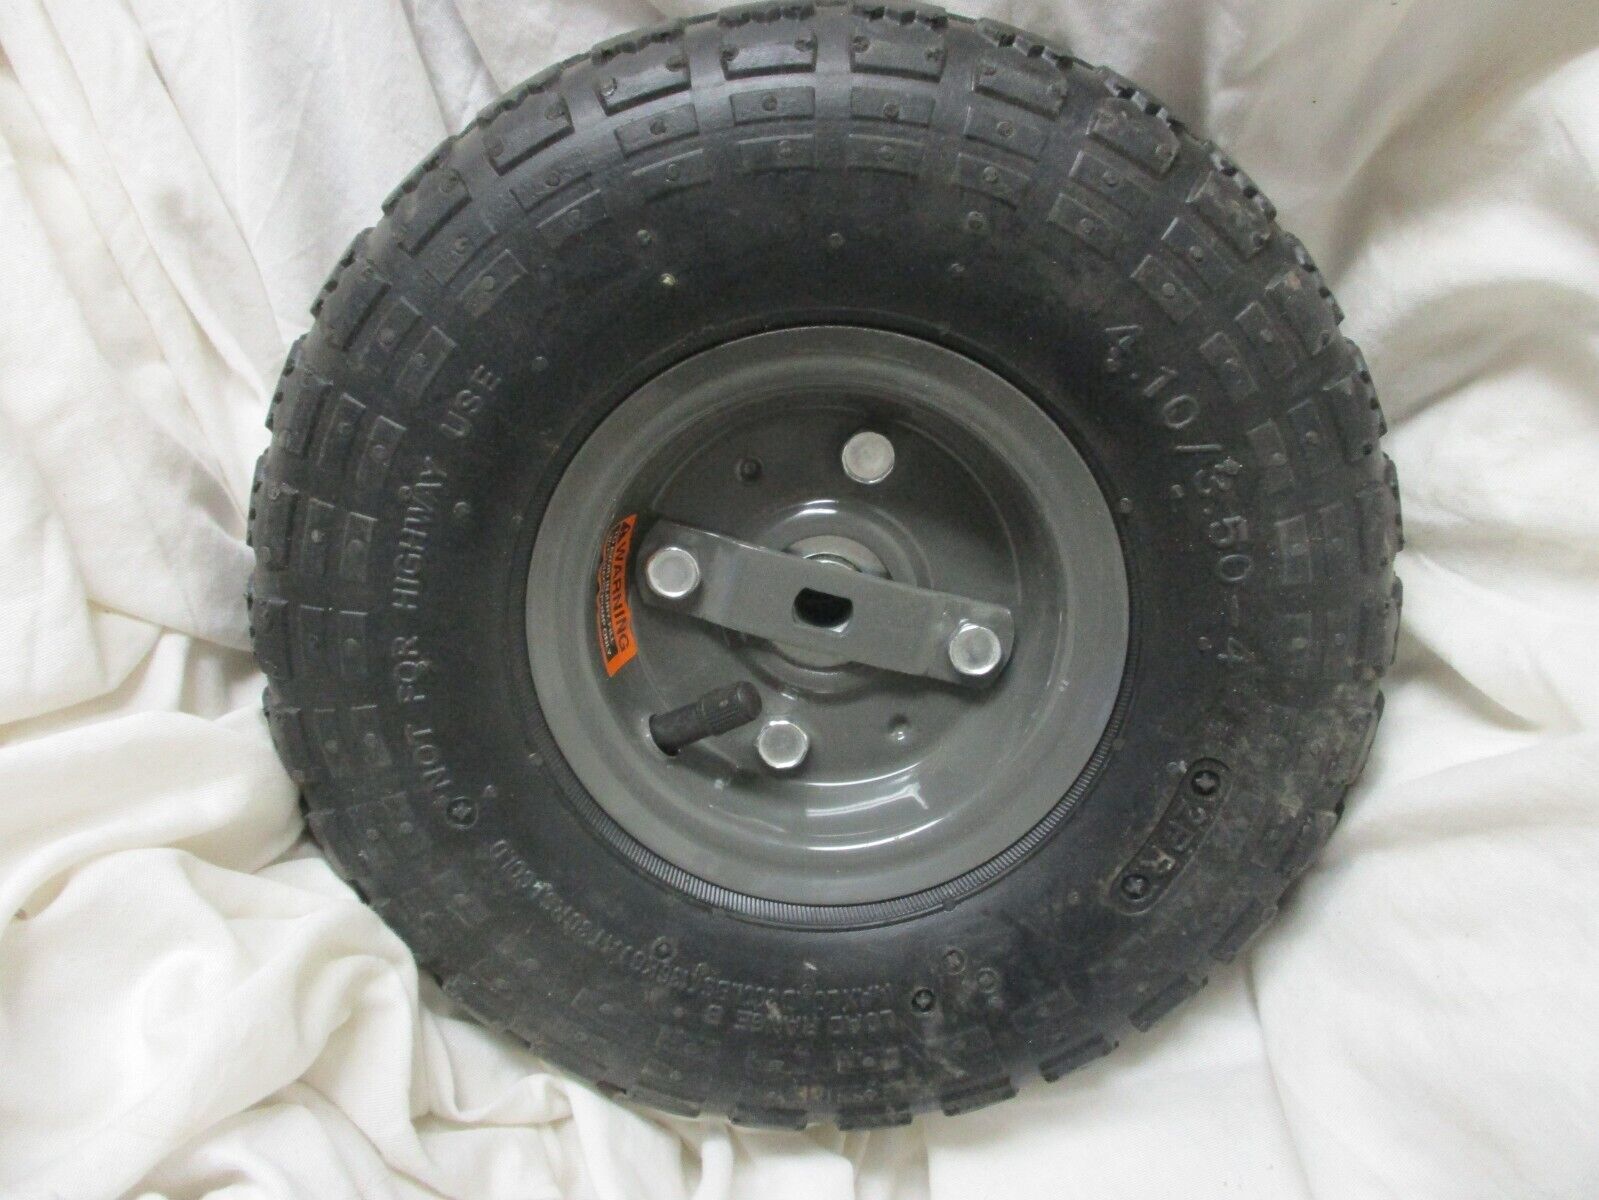 Primary image for Agri-Fab Wheel & Tire Assy 4.10/3.5-4 Wheel/Drive AGR-48865